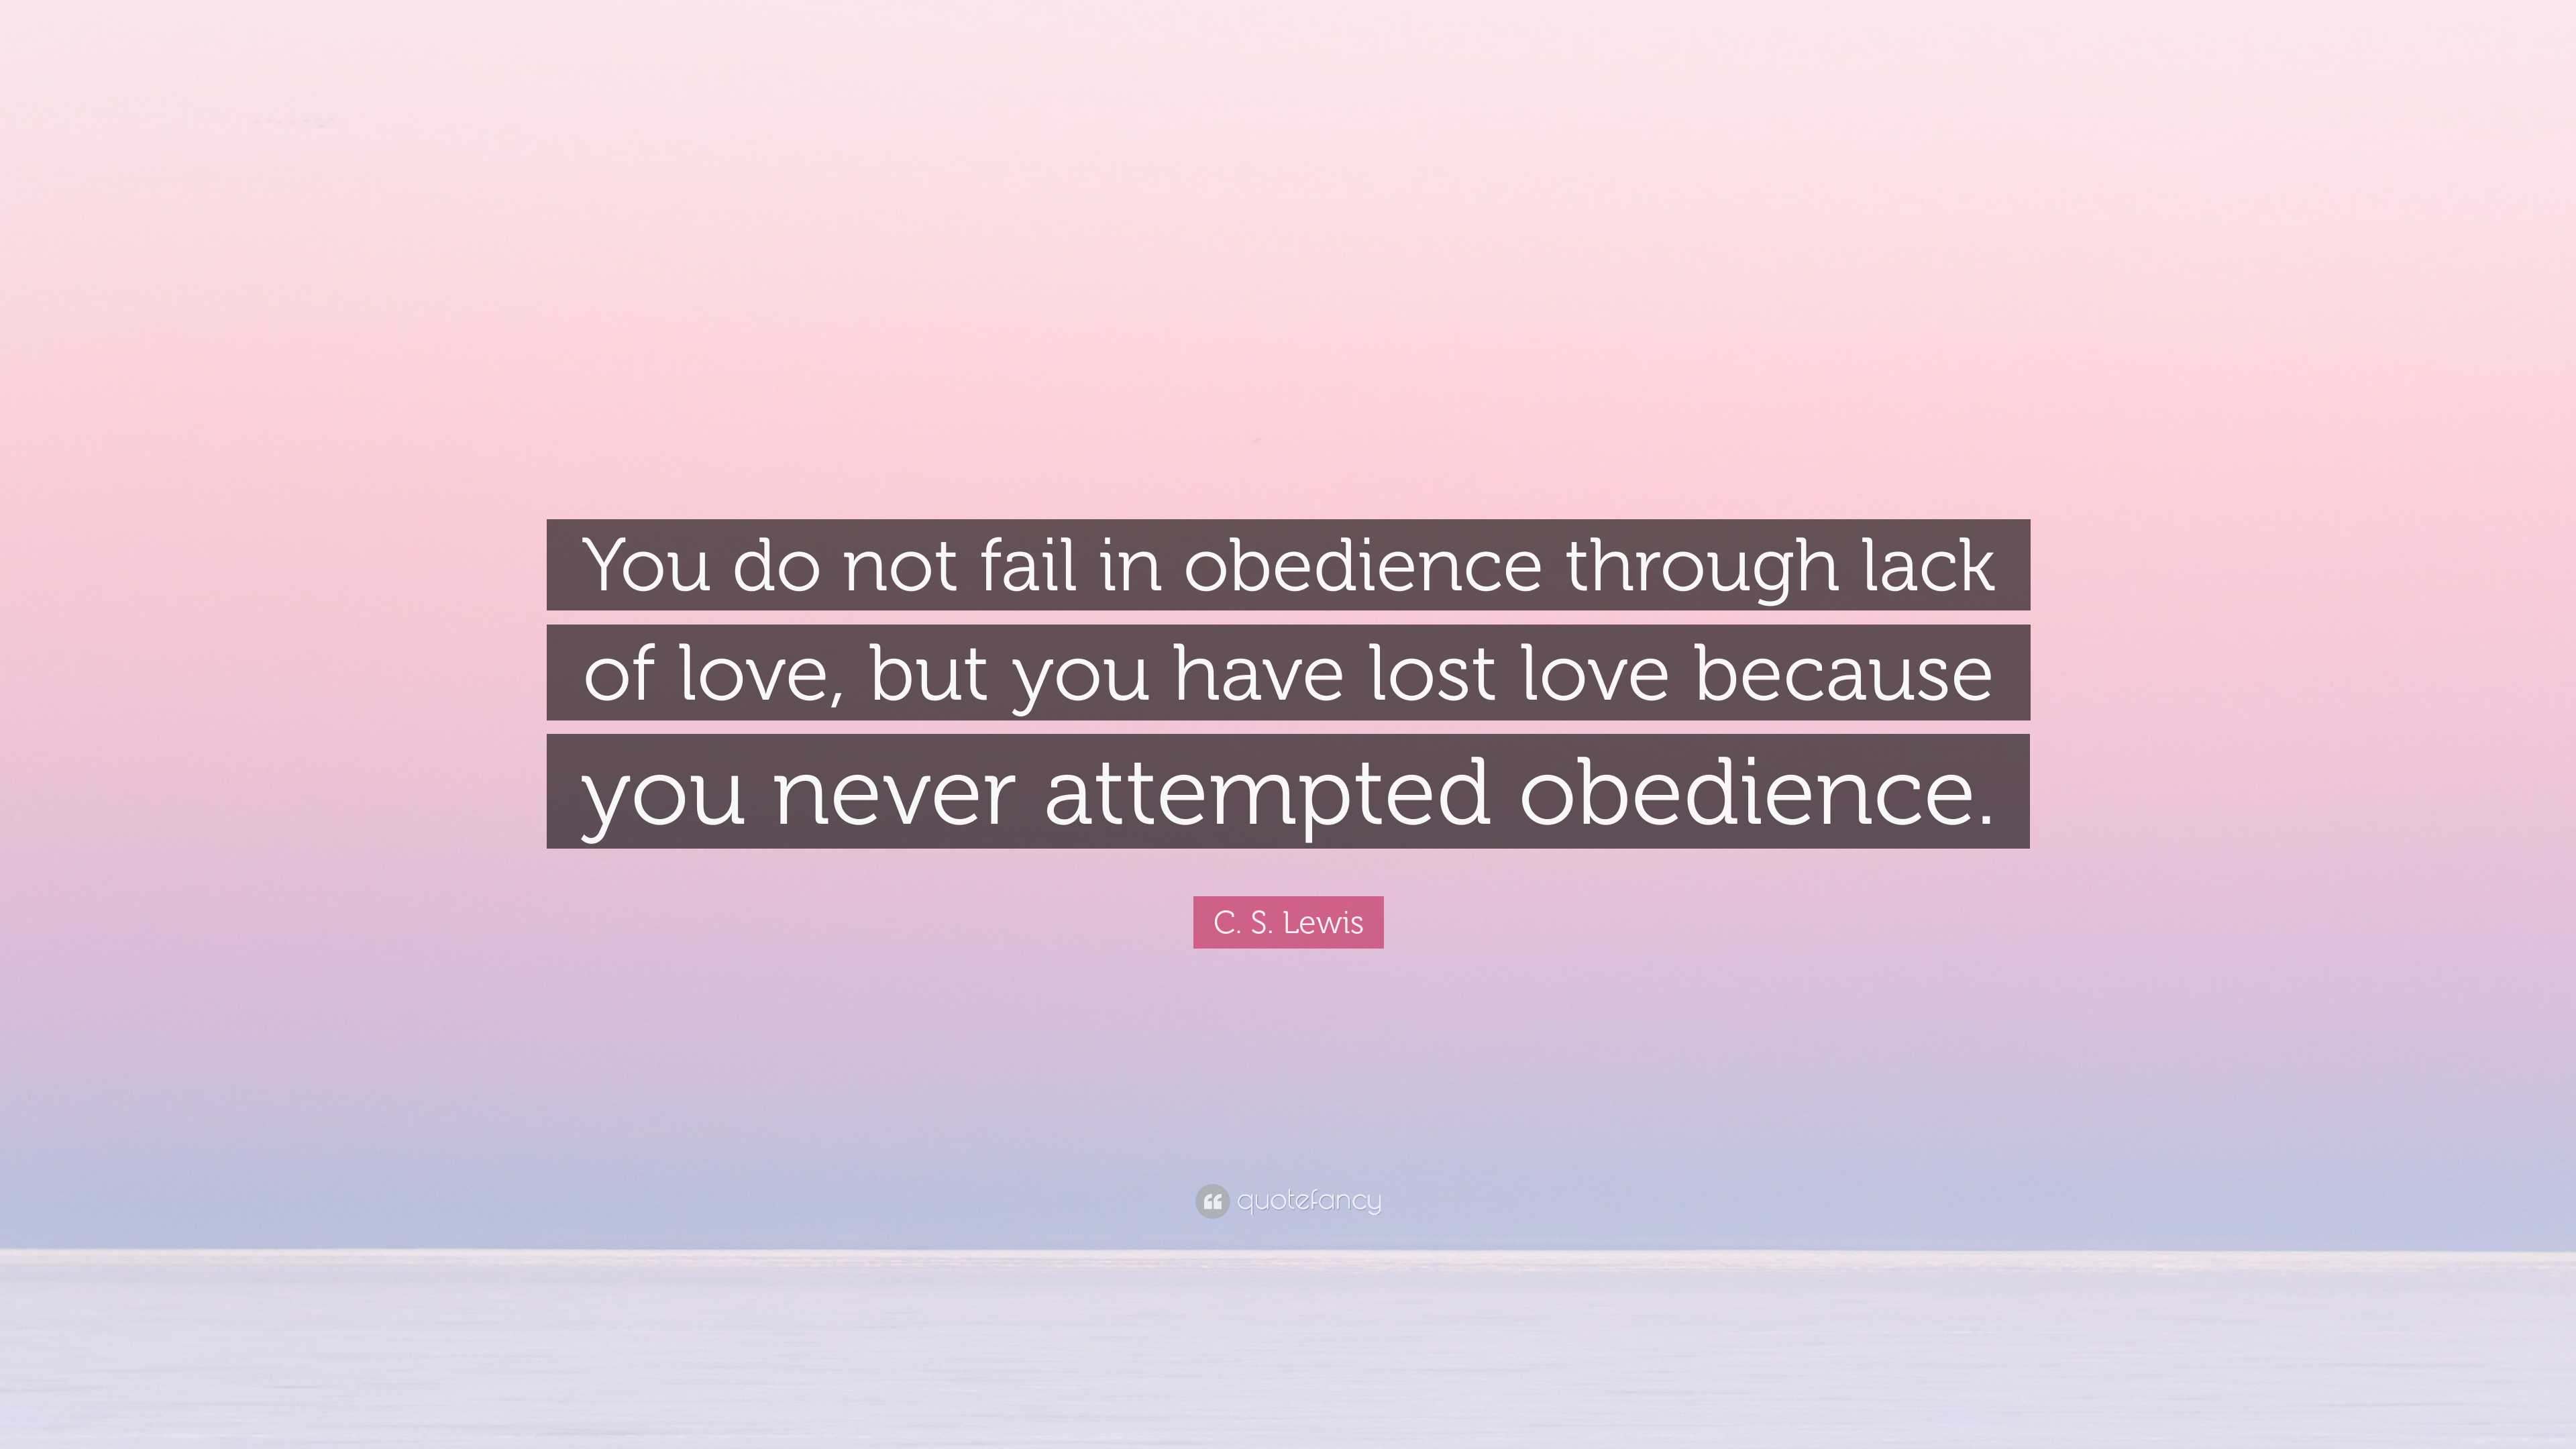 C. S. Lewis Quote: “You do not fail in obedience through lack of love ...